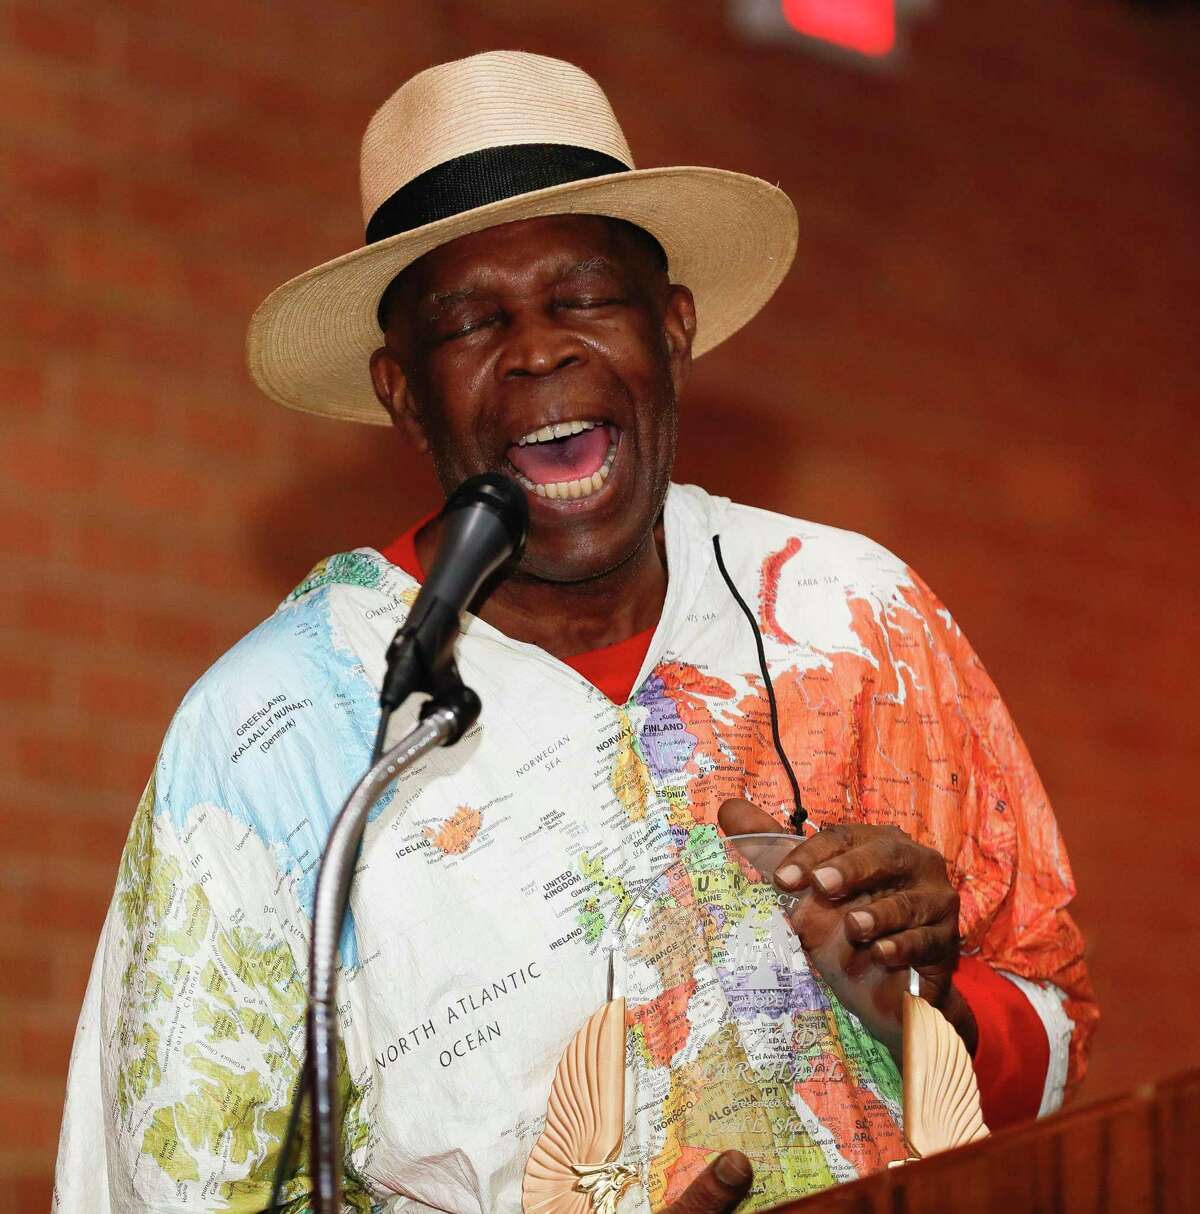 Cecil L. Shaw, Jr., who served as grand marshal of the annual Leon Tolbert Annual Black History Month Parade, sings at Booker T. Washington Junior High School, Saturday, Feb. 8, 2020, in Conroe.